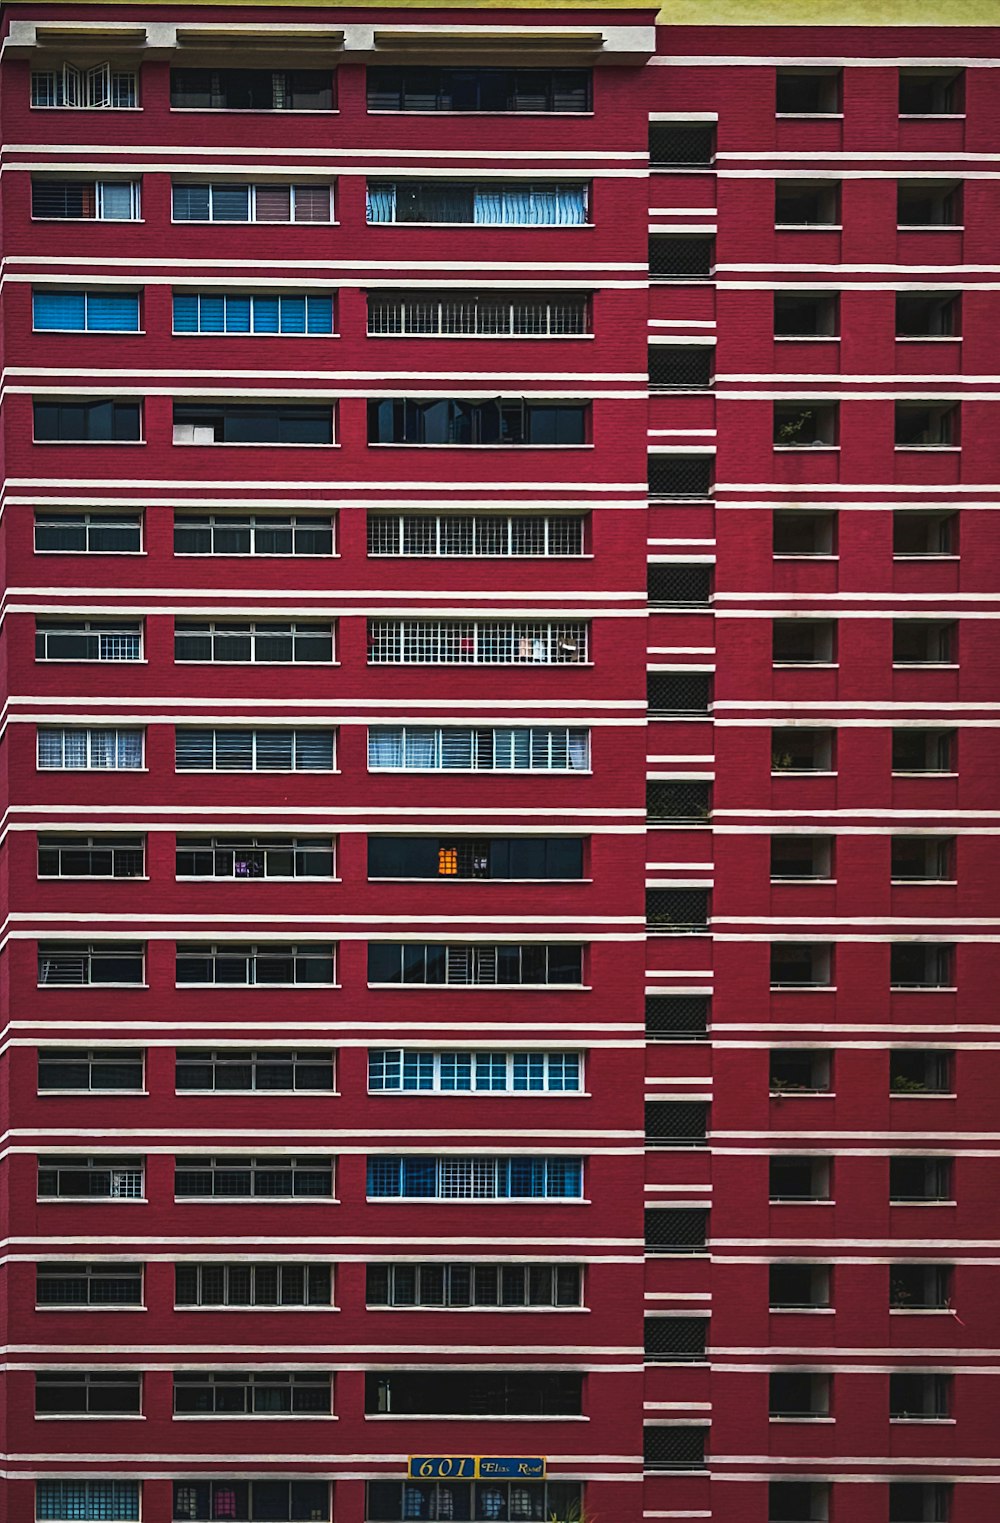 a large red building with many windows and balconies